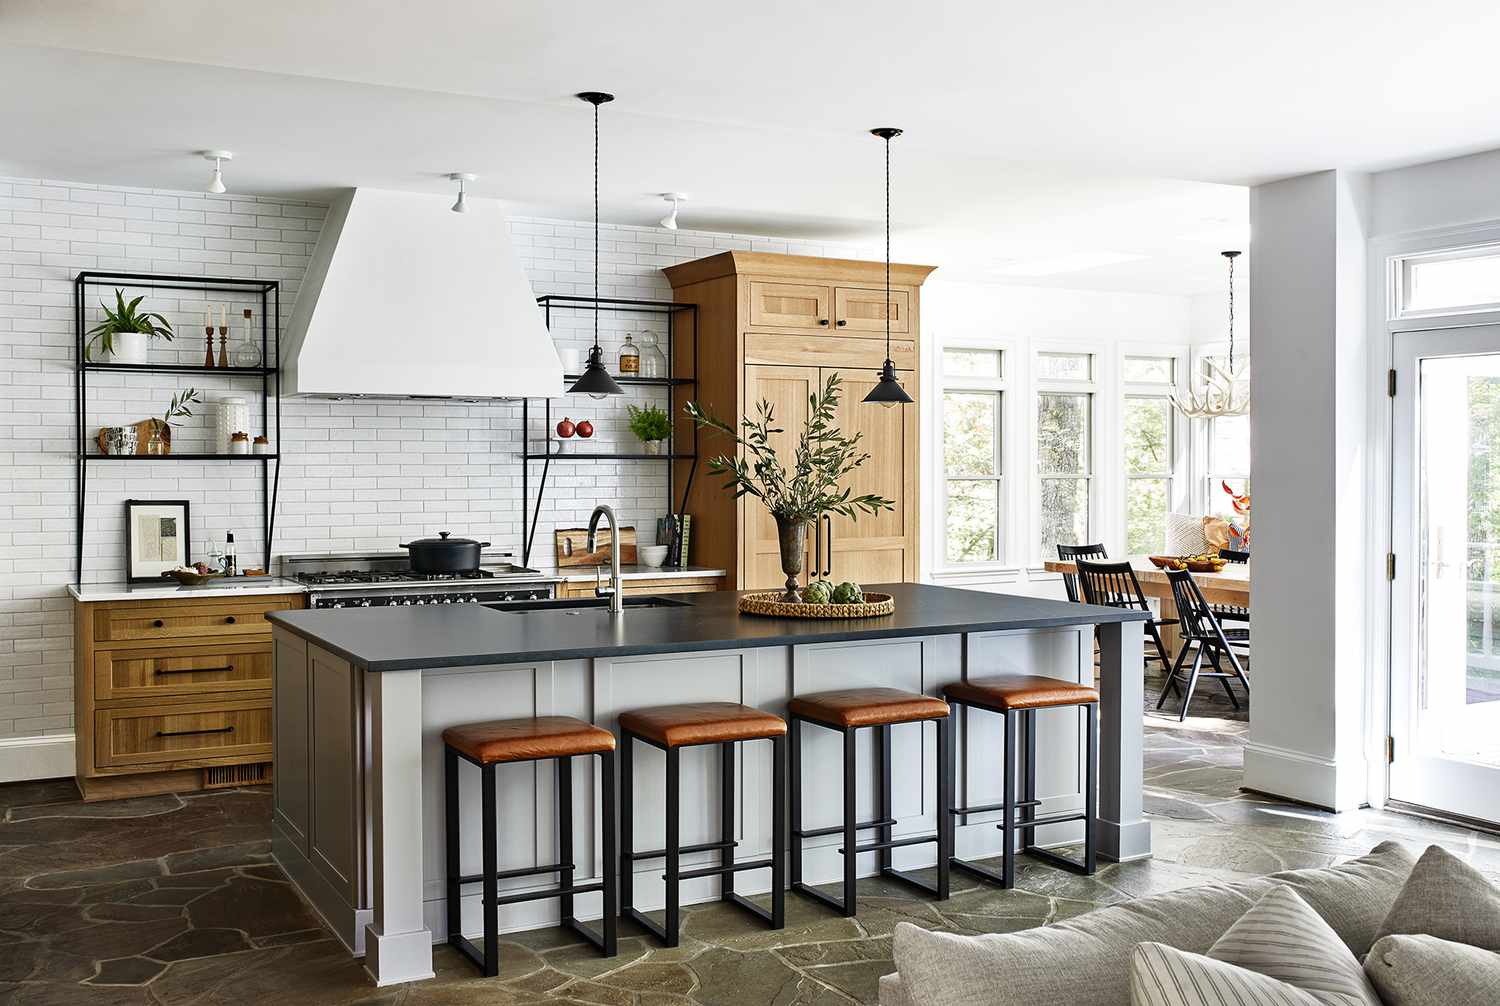 large, open kitchen with white walls, black counter top and light wood